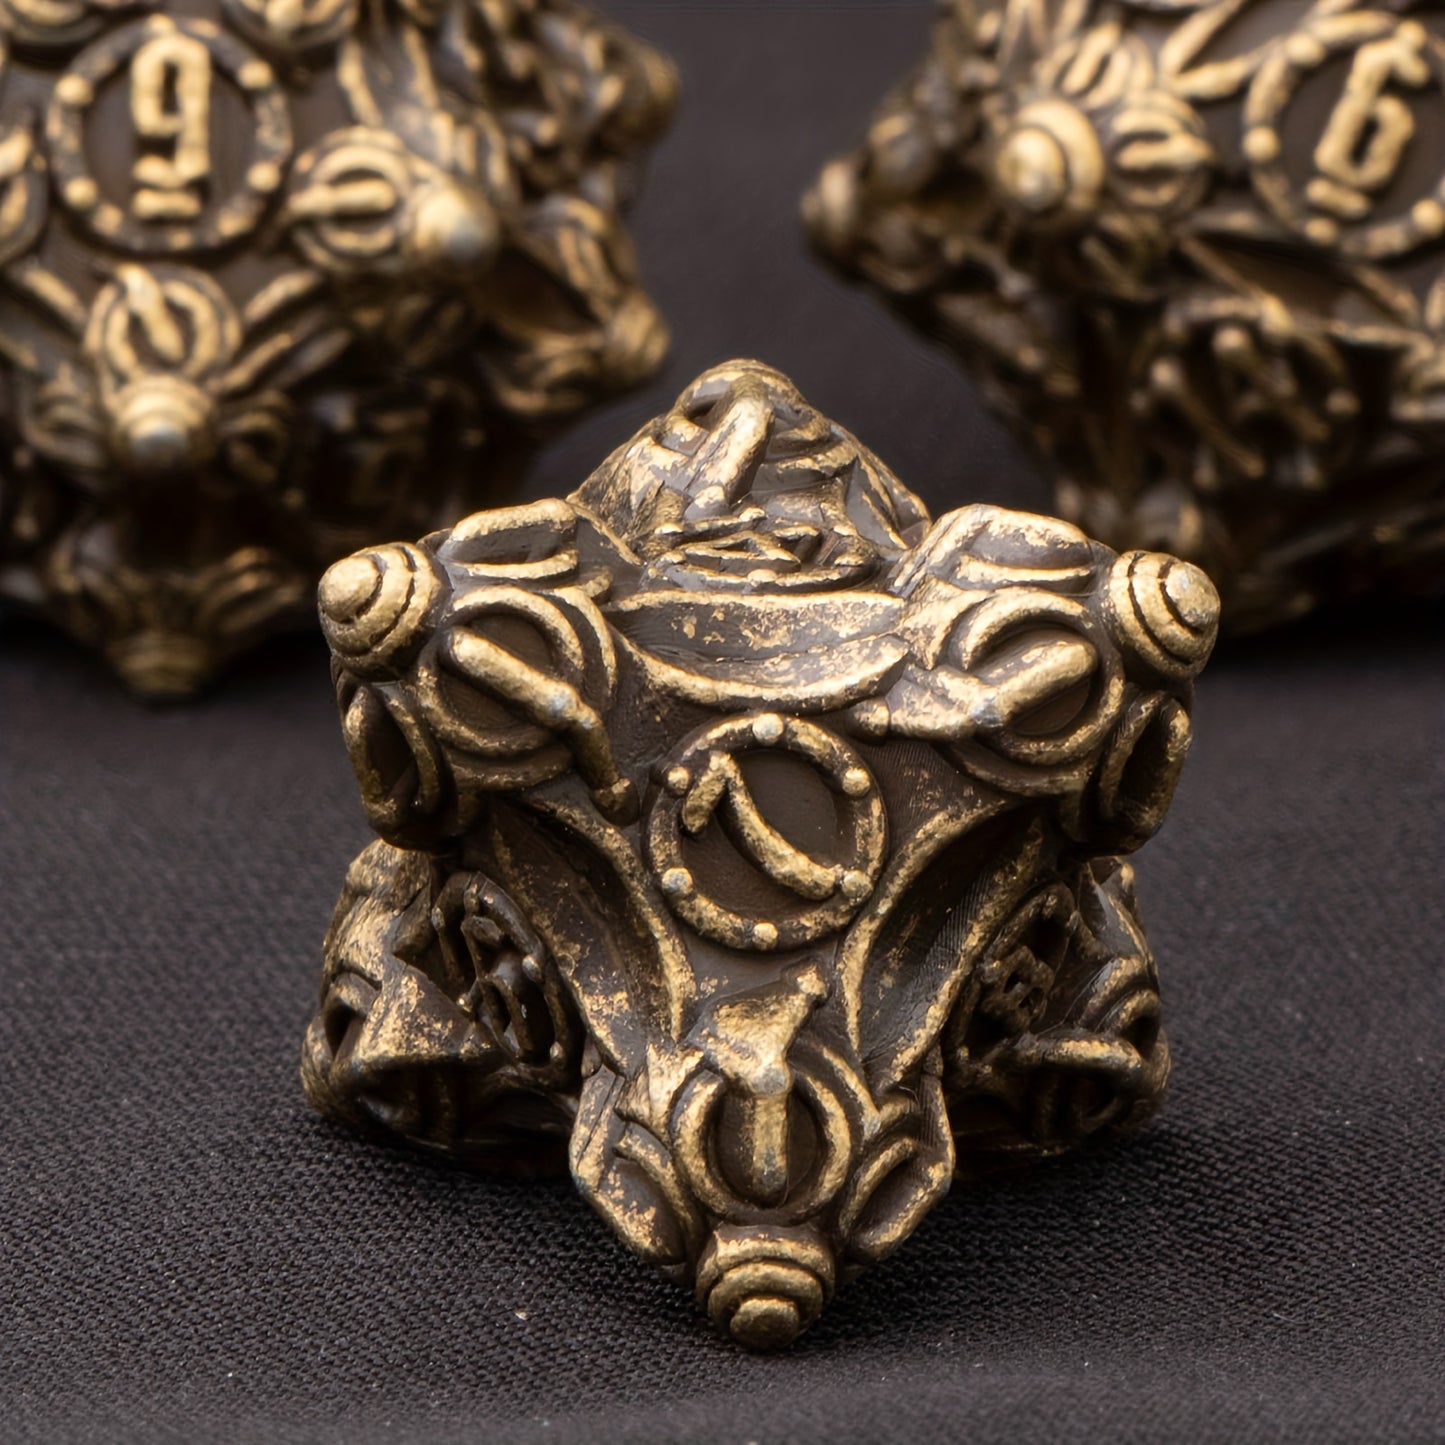 FREE Today: Metal Brown Dice For D&D